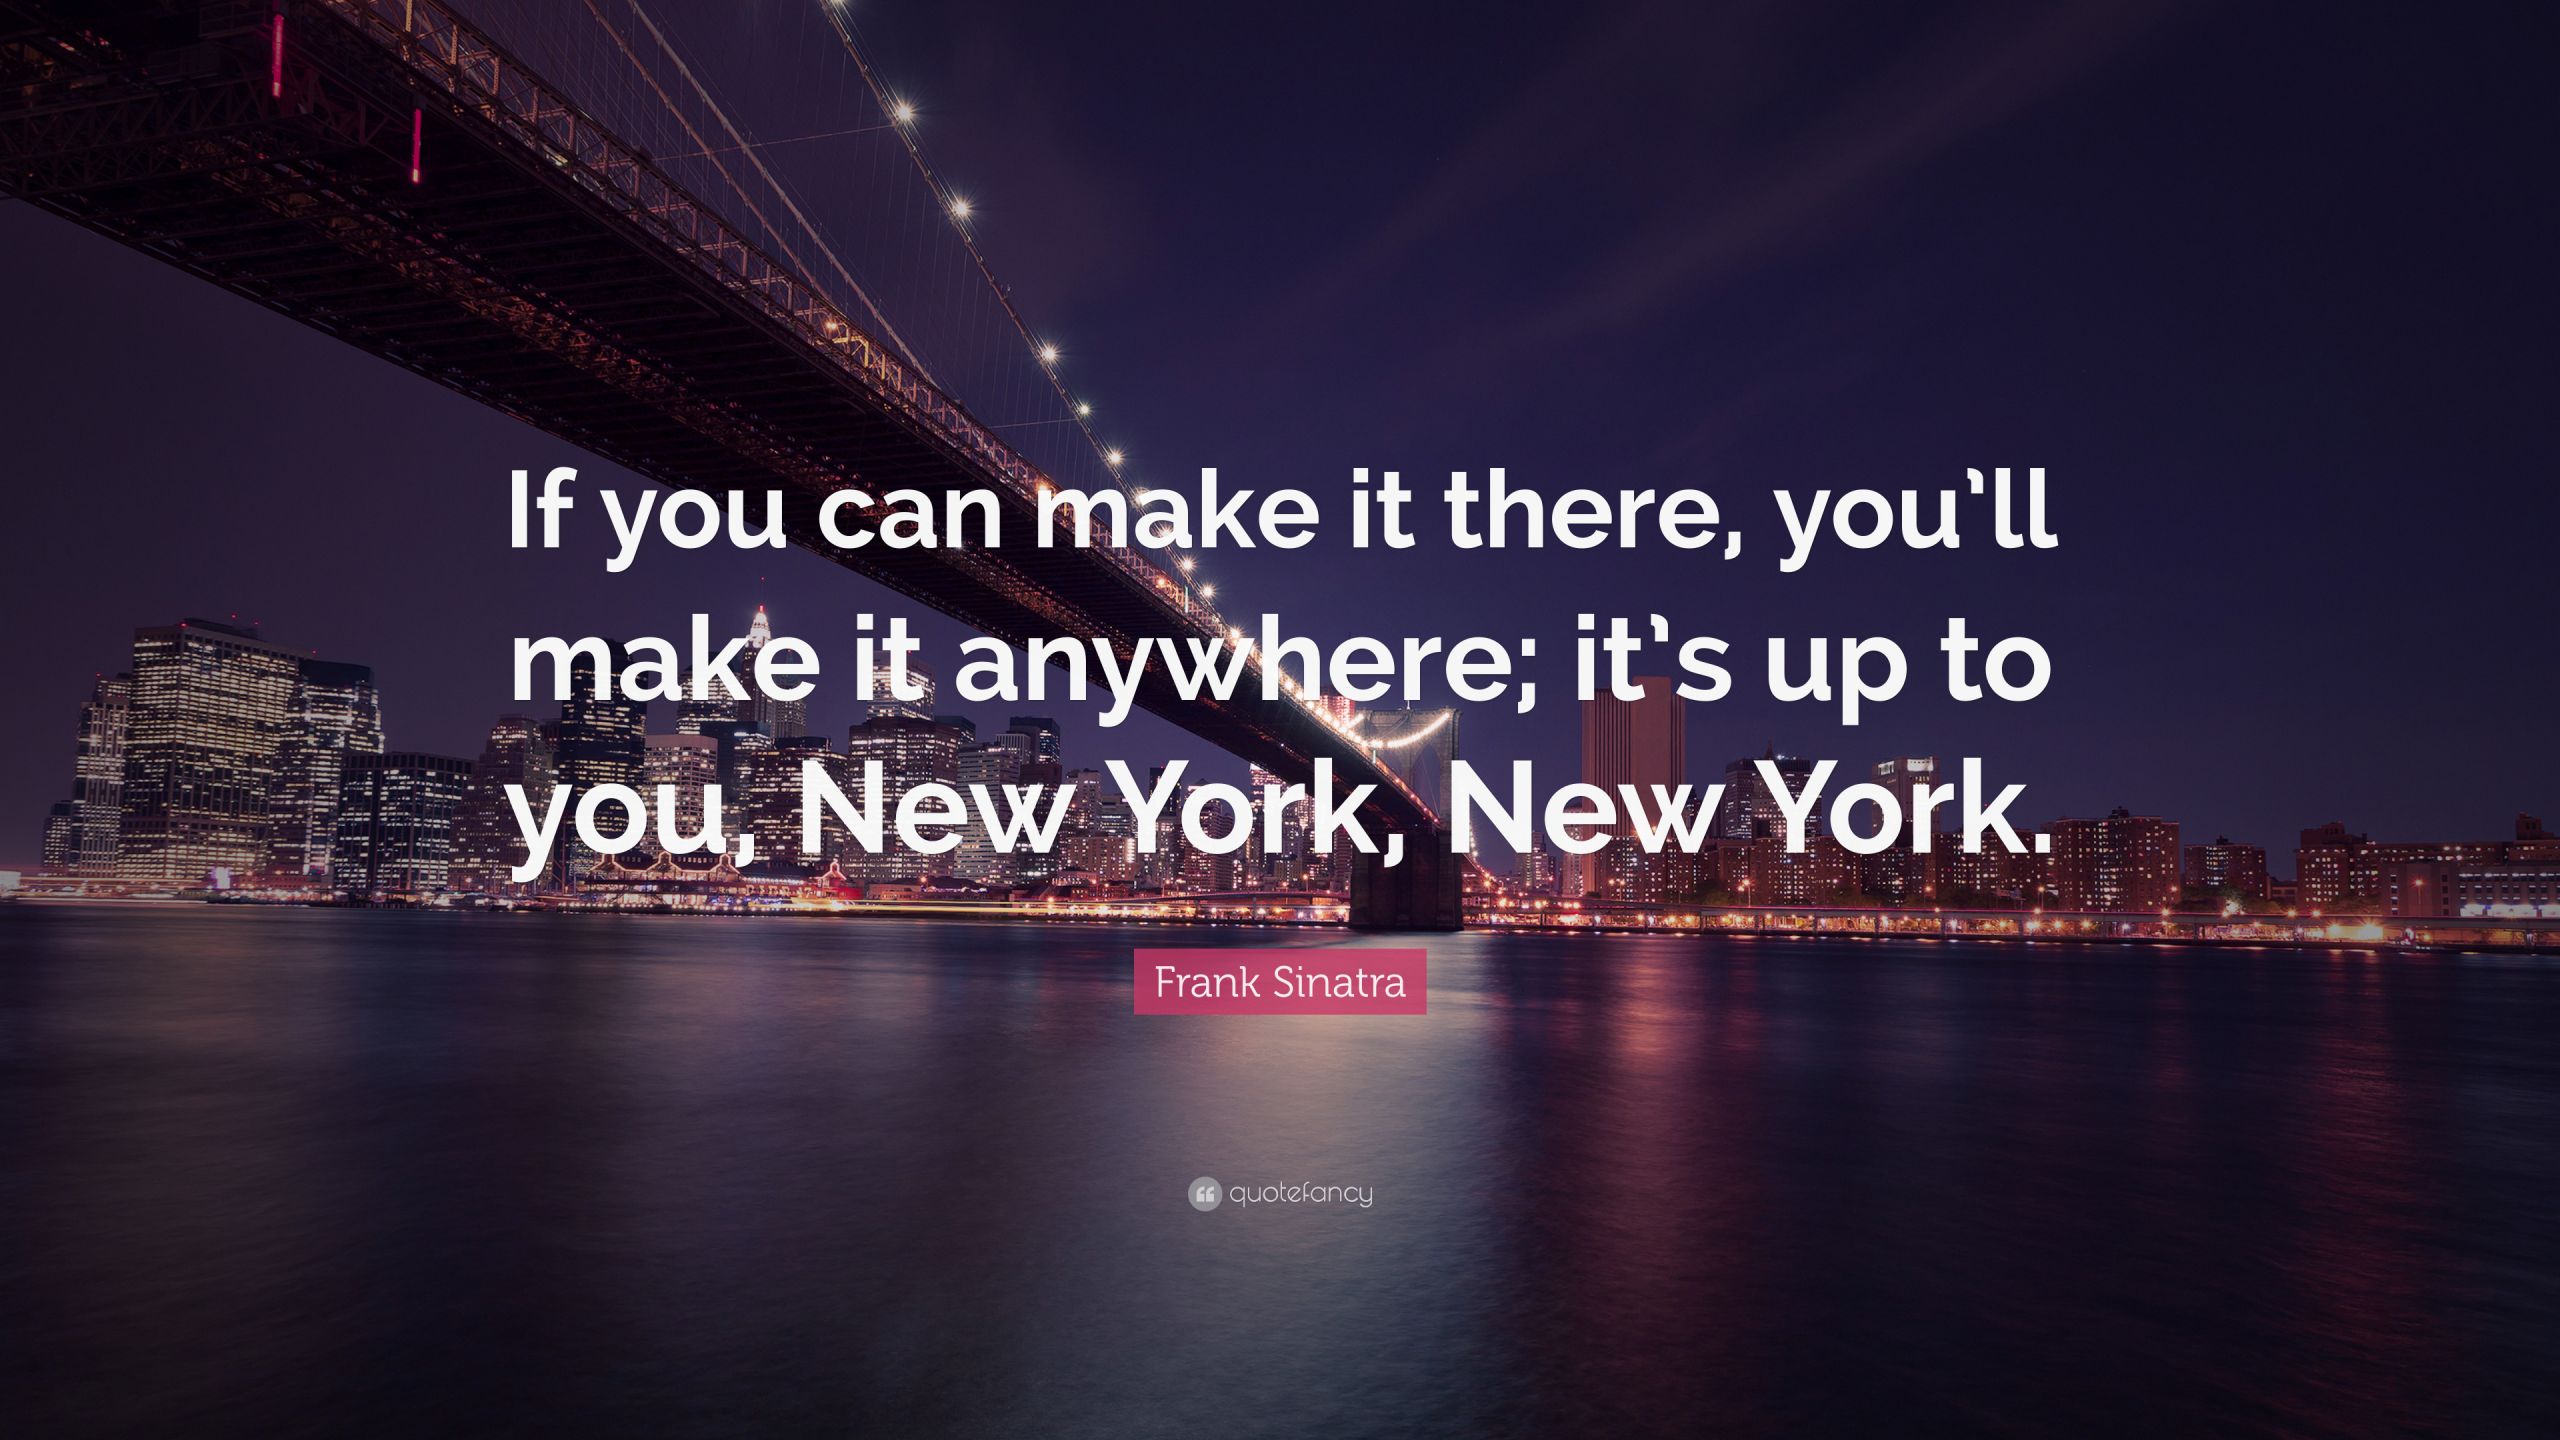 New York Life Quote
 Frank Sinatra Quote “If you can make it there you’ll